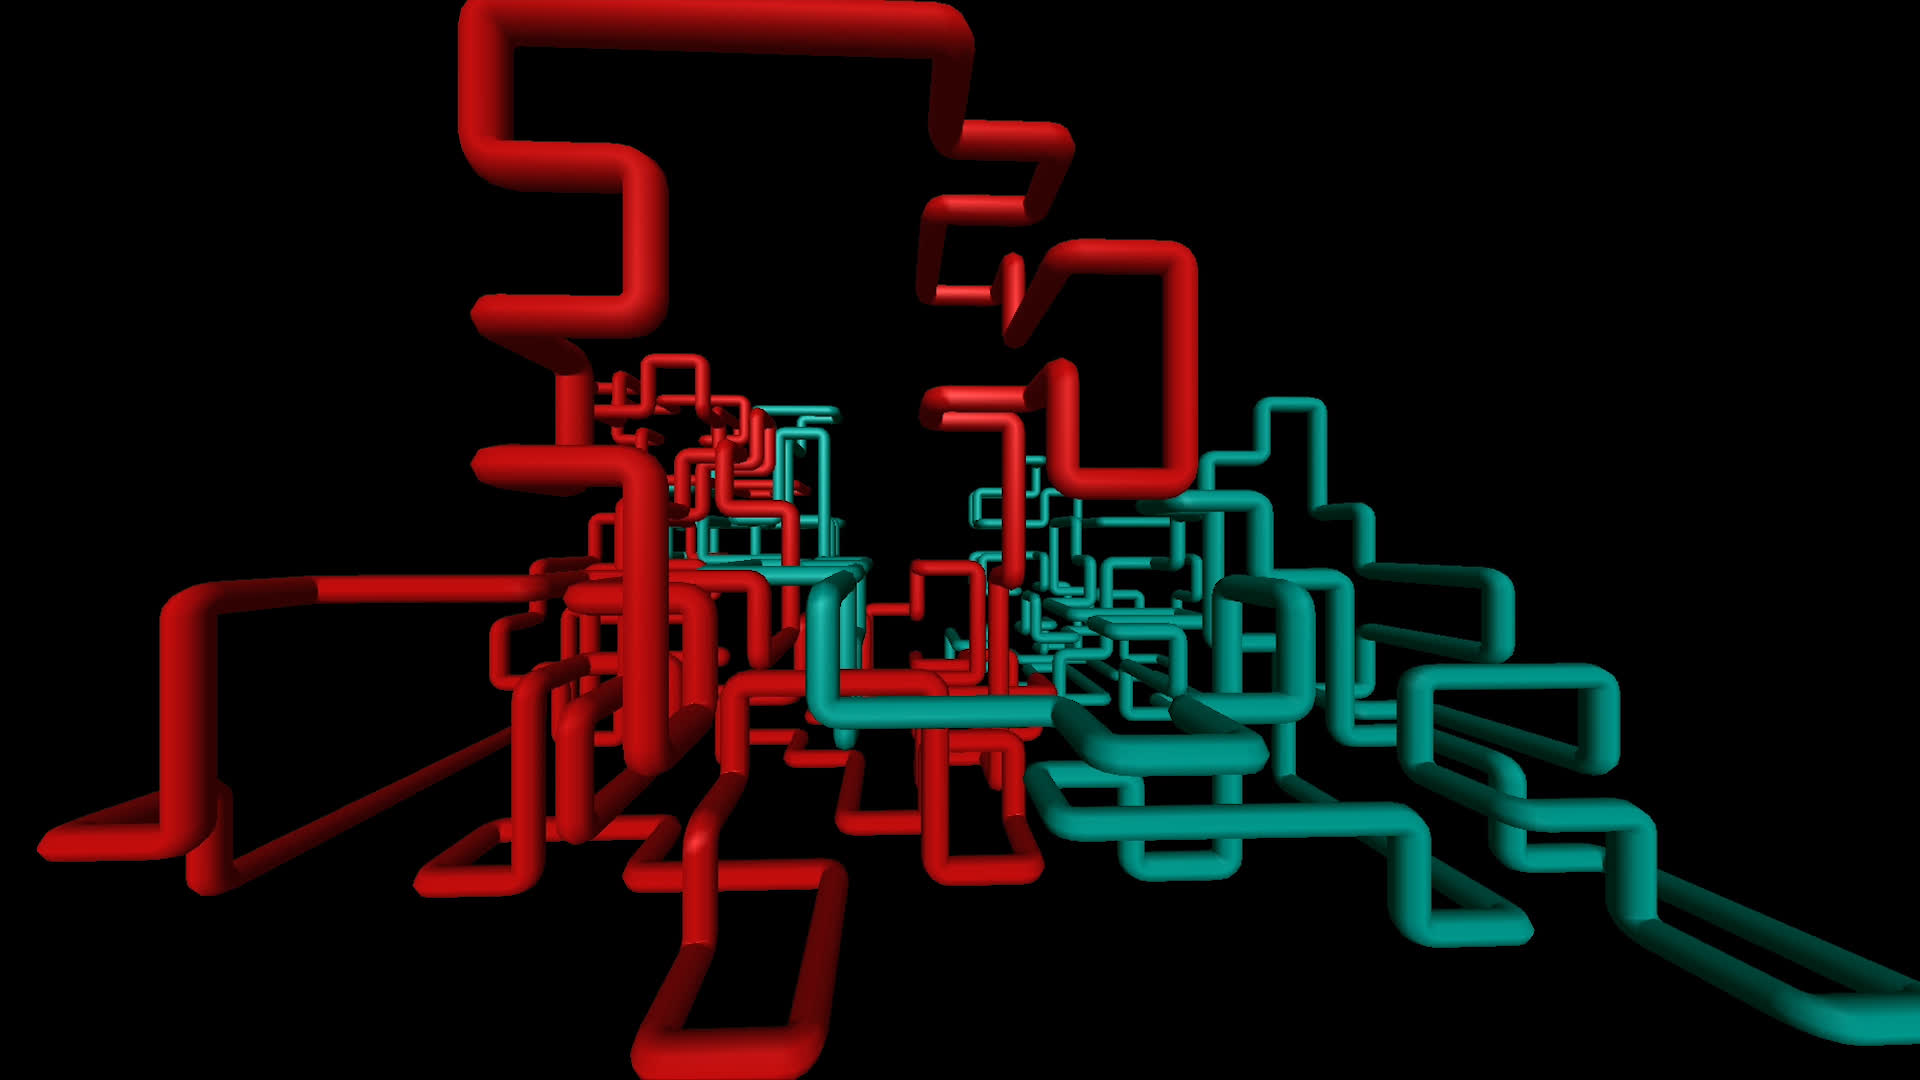 Windows NT 3.5 programmer tells the origin story of Microsoft's iconic 3D Pipes screensaver